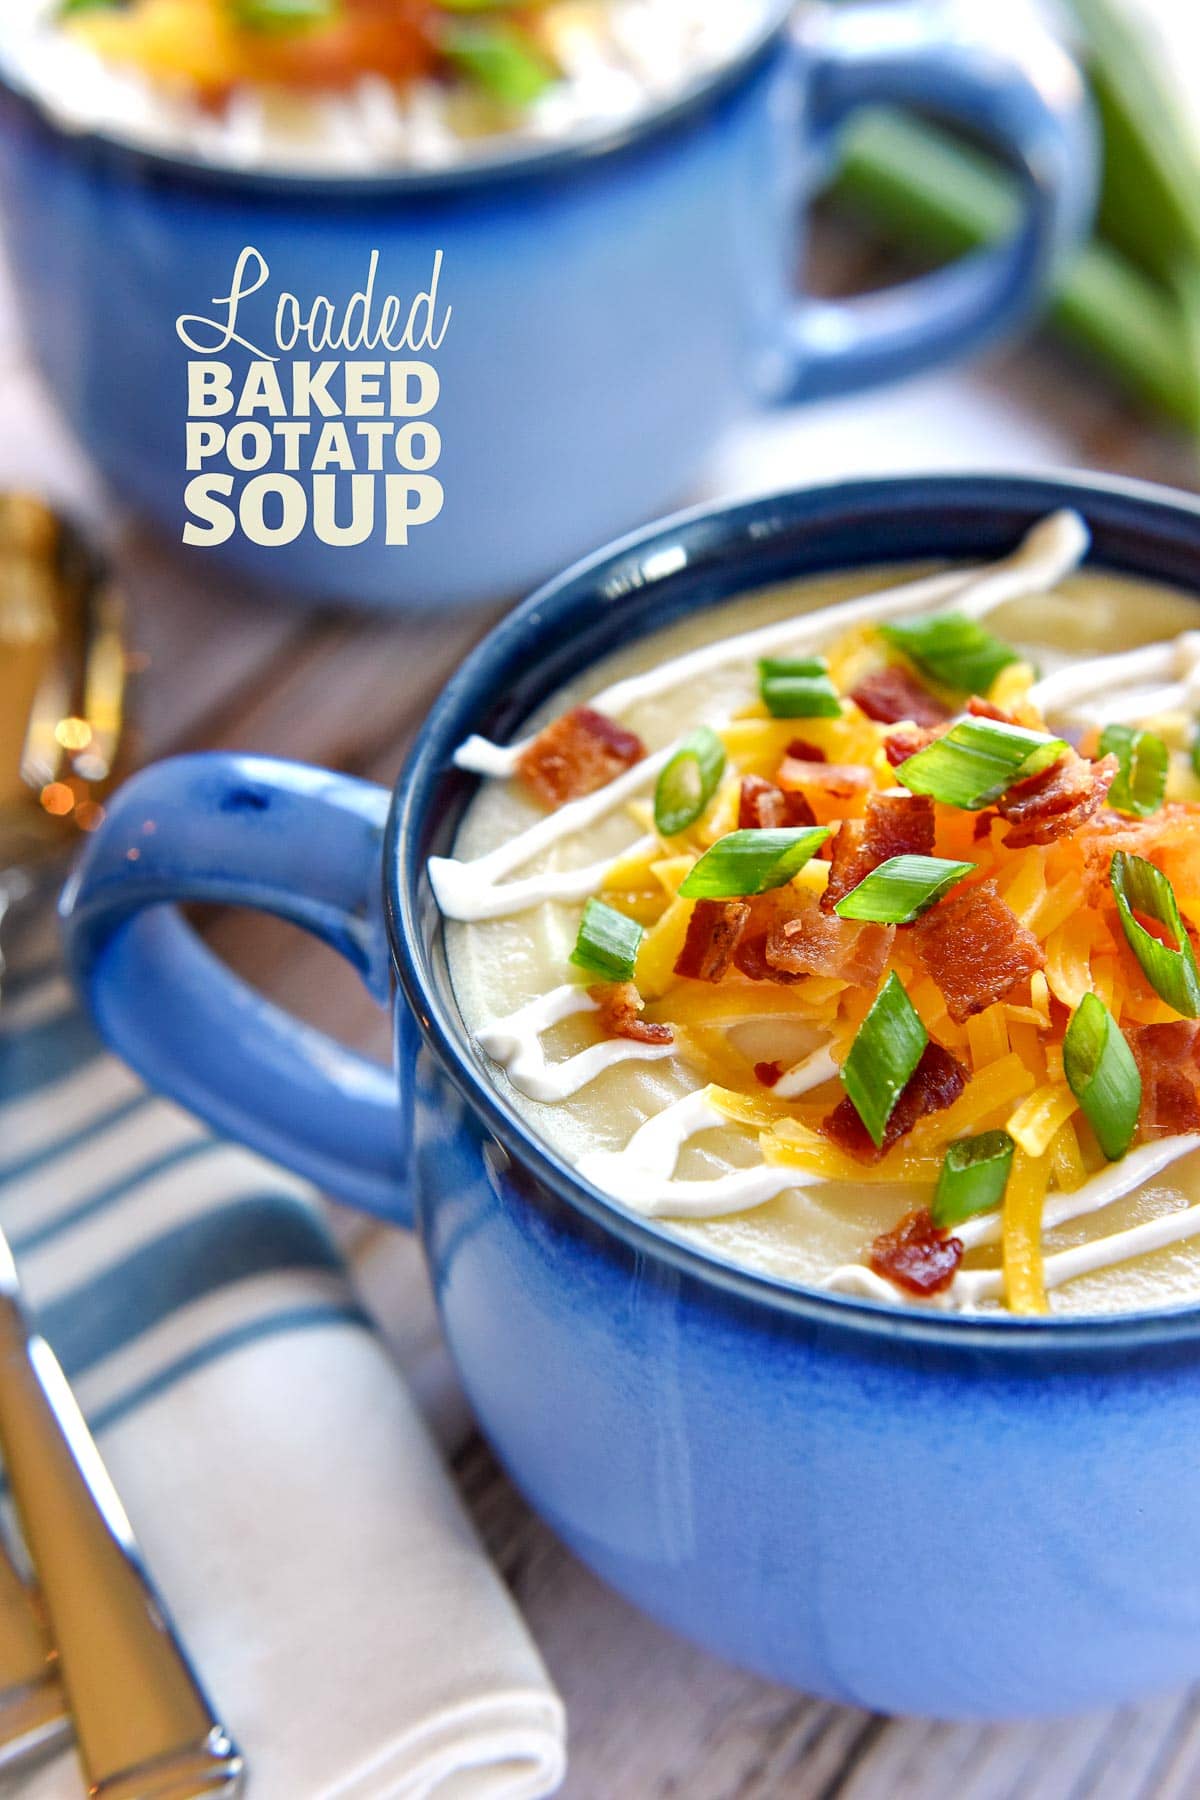 Loaded Baked Potato Soup with text overlay.